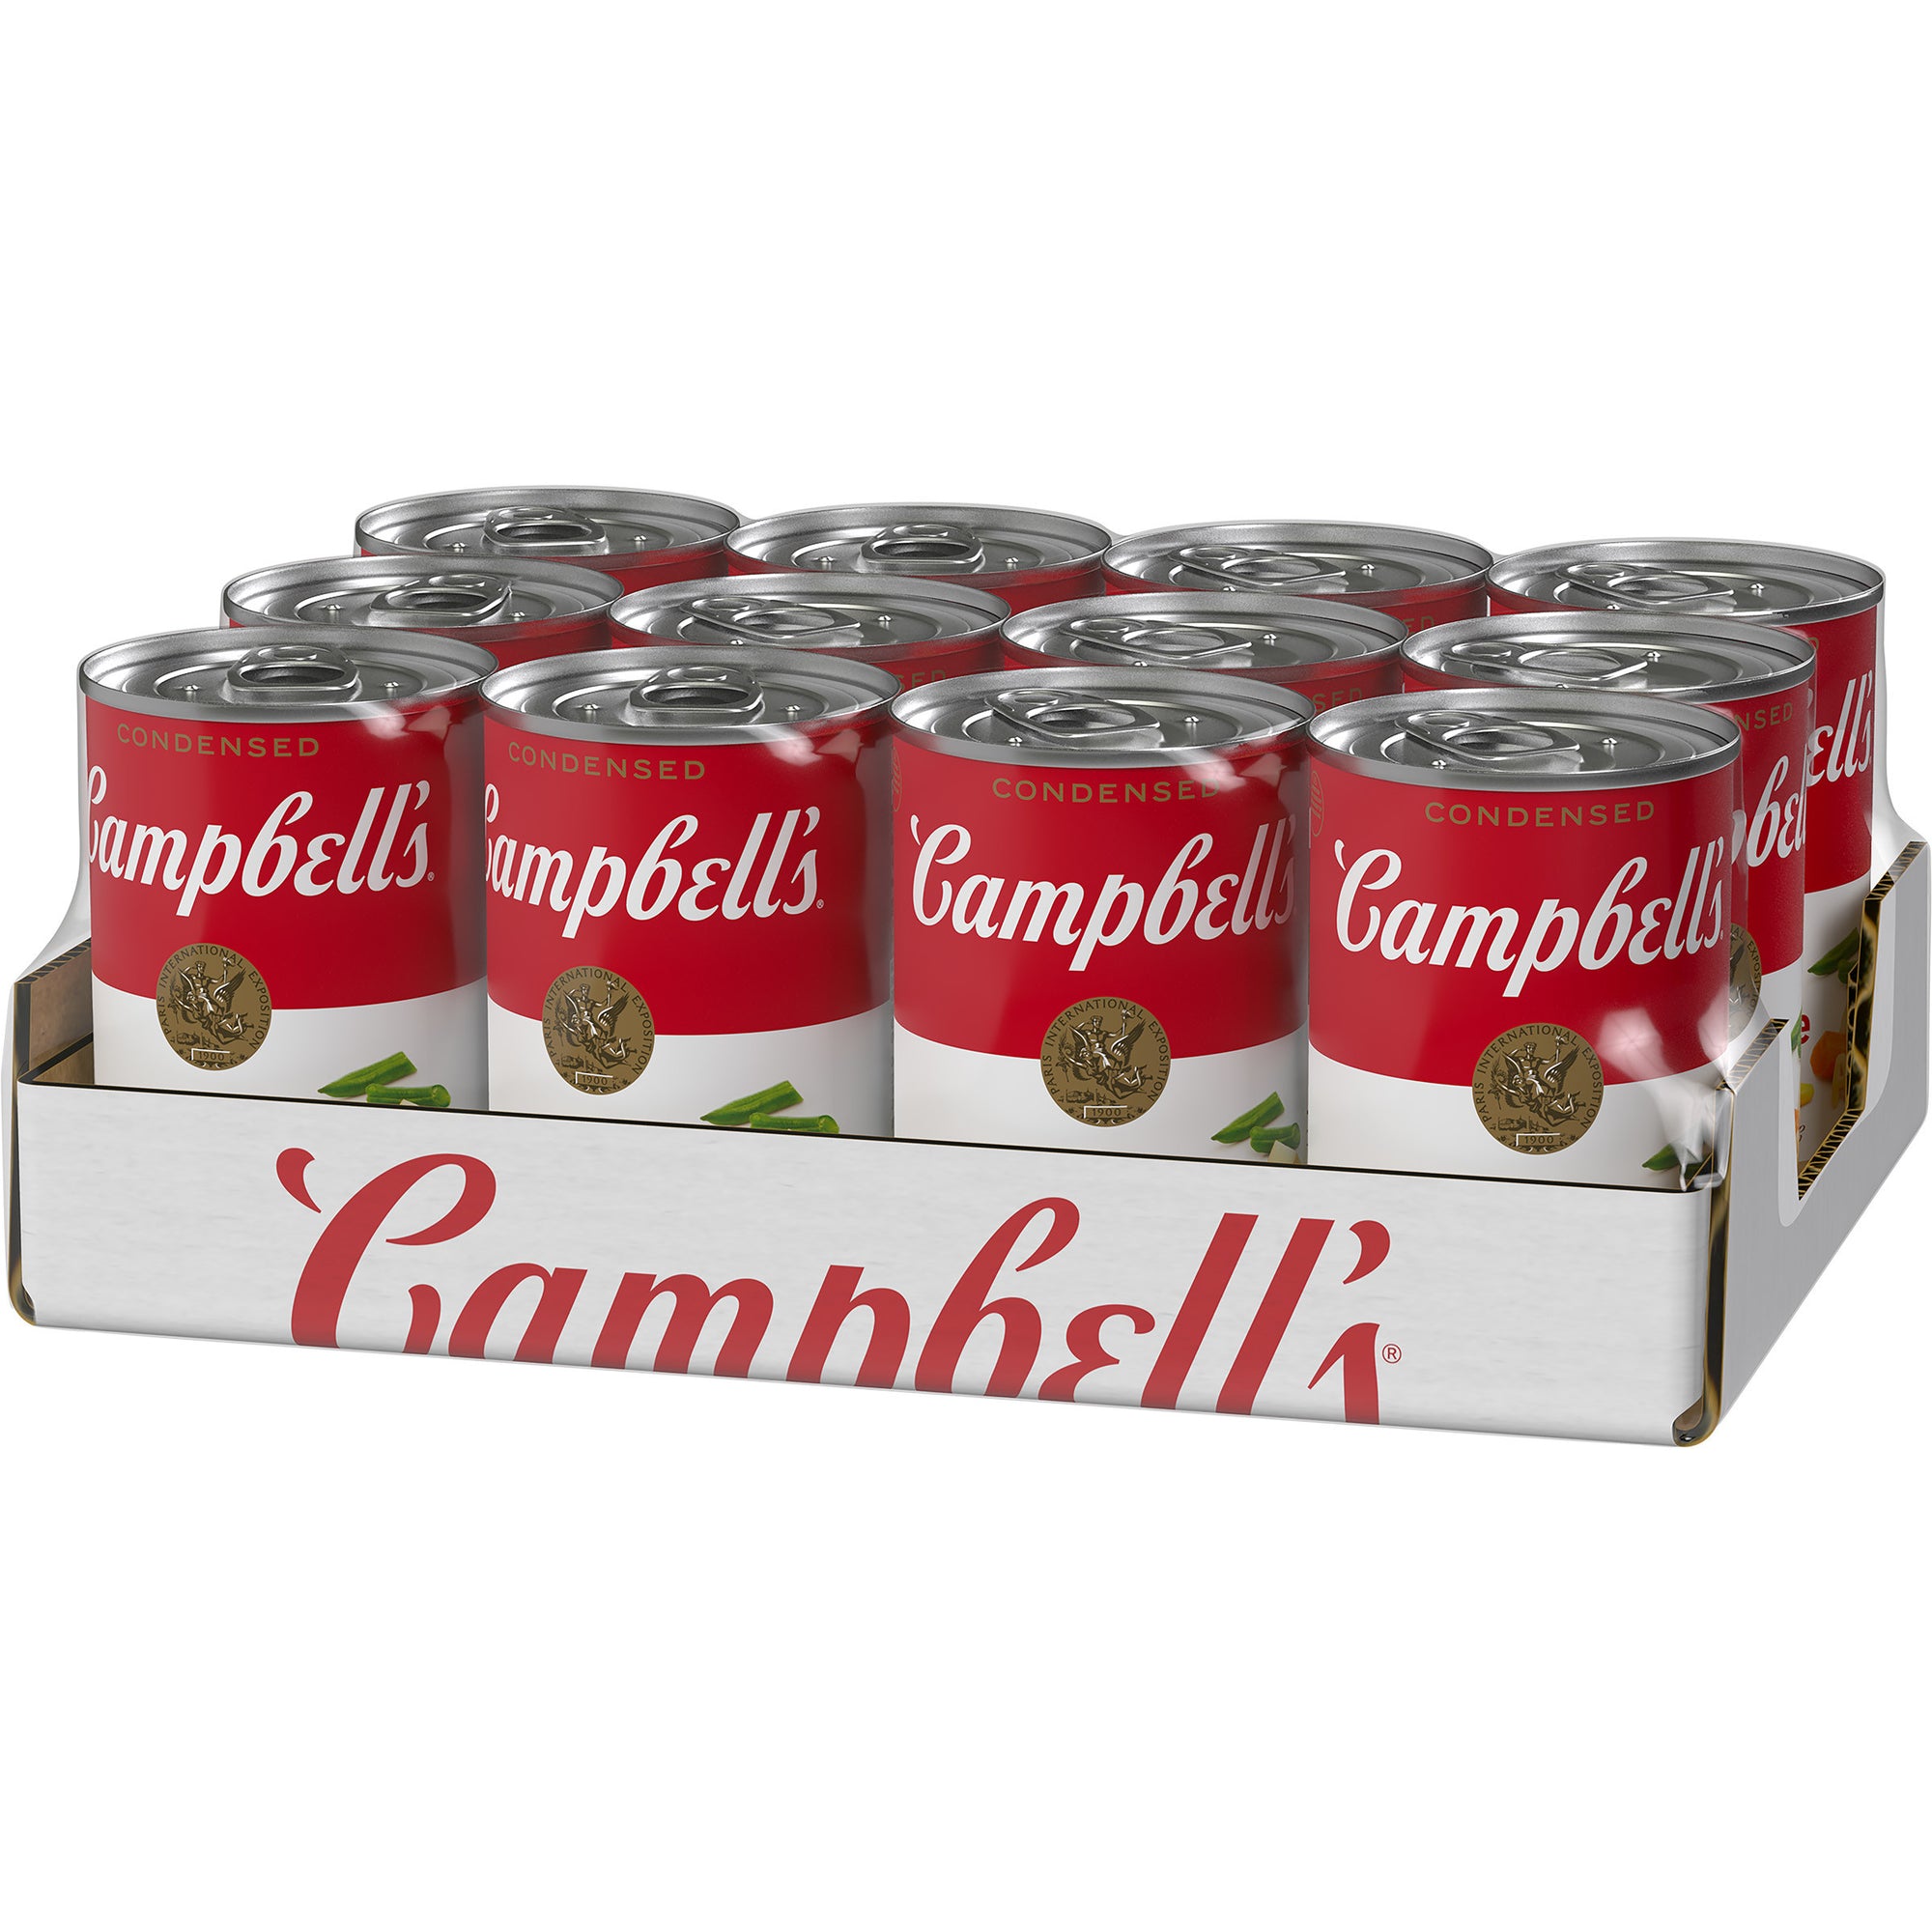 CAMPBELL'S CONDENSED SOUP RED & WHITE VEGETABLE, 12 - 10.5 OZ